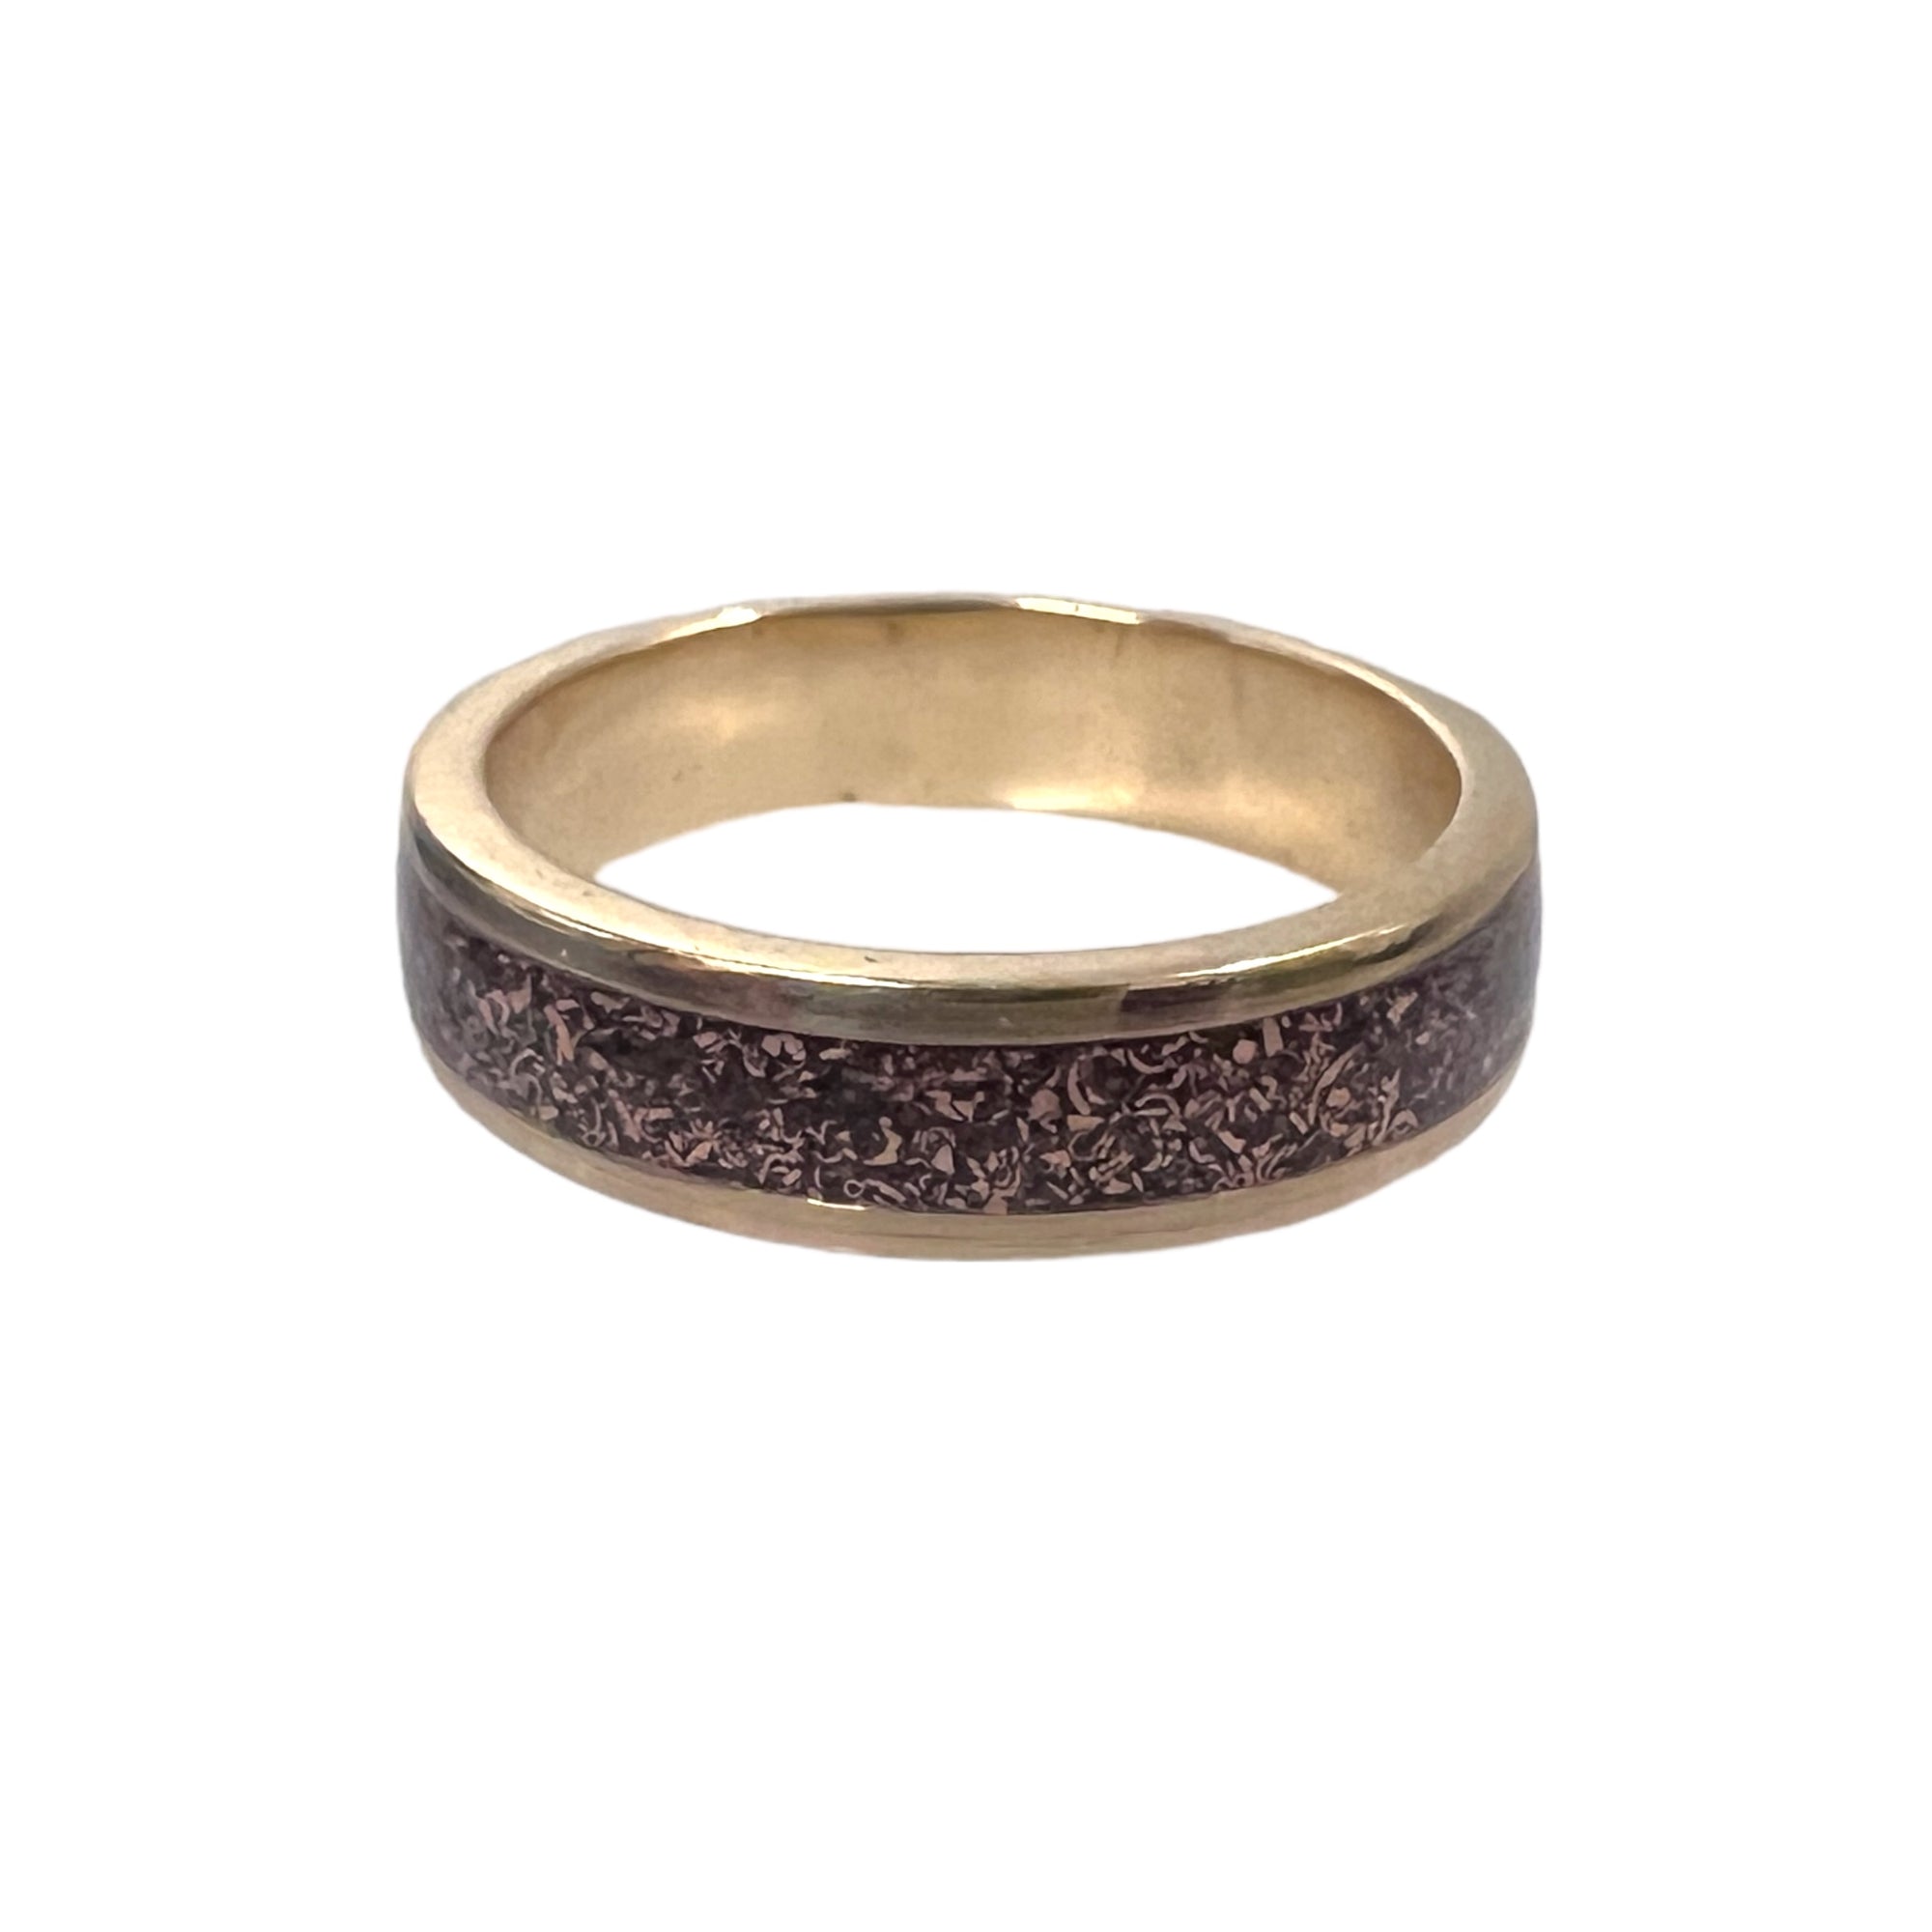 Custom Ring created with 14k Gold and Atocha Copper Inlay